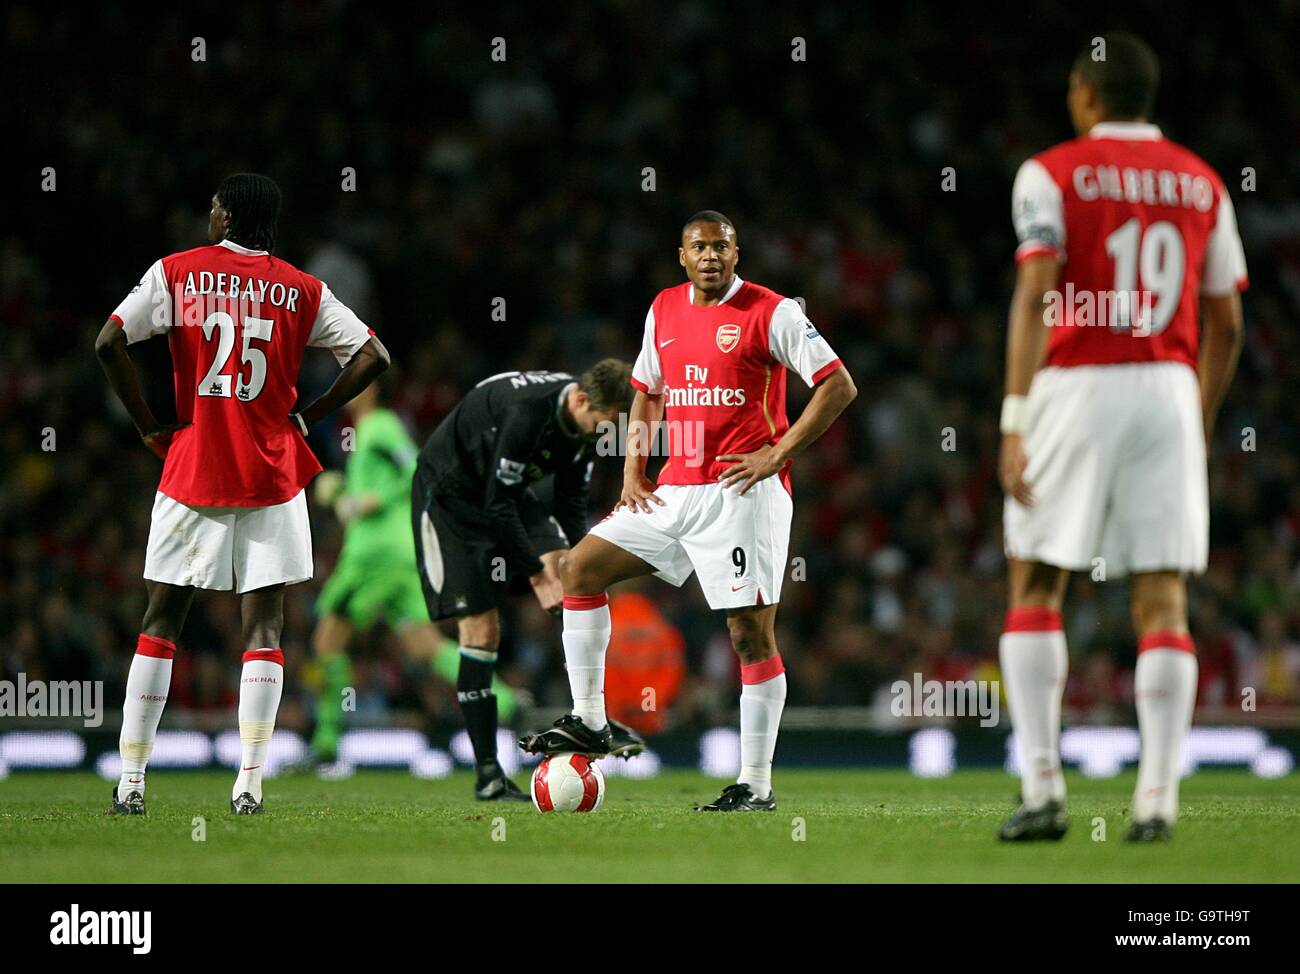 Soccer - FA Barclays Premiership - Arsenal v Manchester City - Emirates Stadium. Arsenal players stand dejected after Manchester City's equaliser scored by DaMarcus Beasley Stock Photo